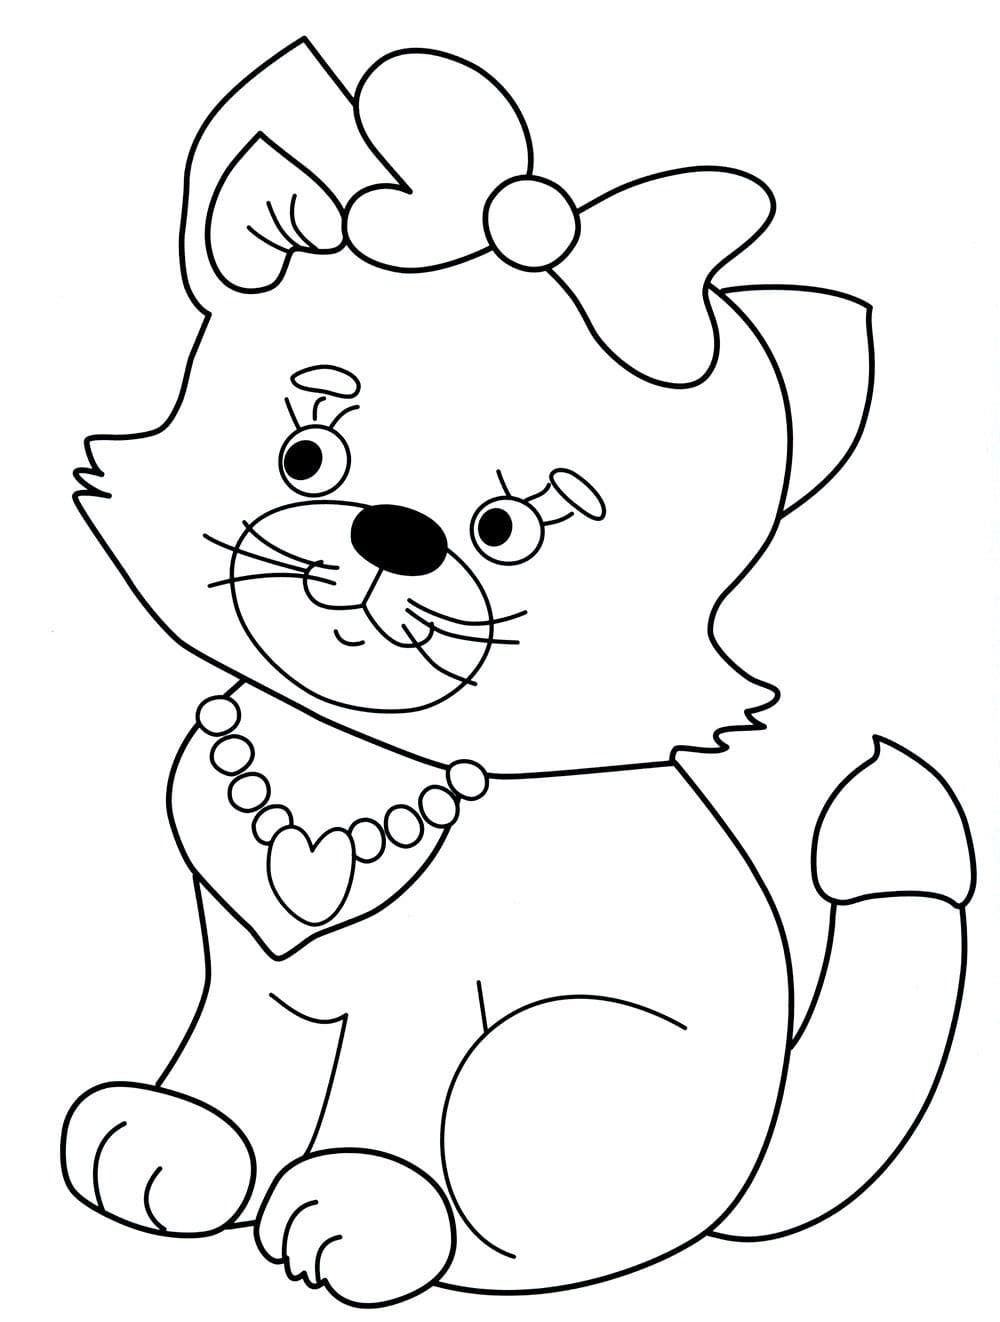 Coloring pages for kids 5 years. Print for free, 100 pictures